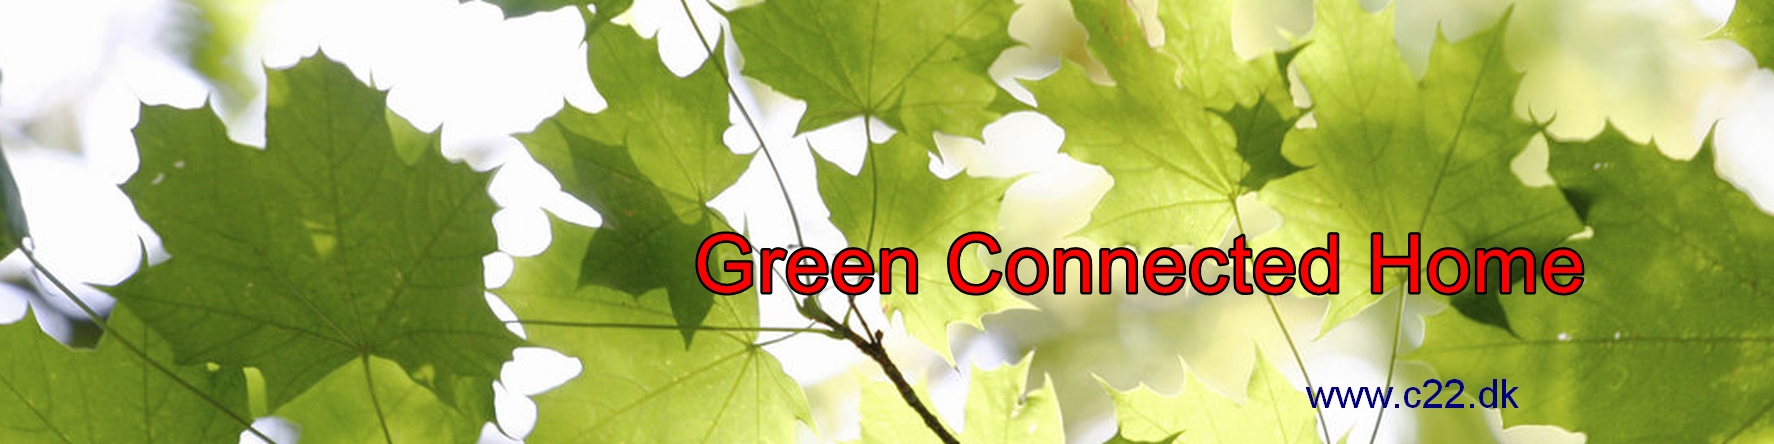 latest trends and technology in the Green connected Home The next generation